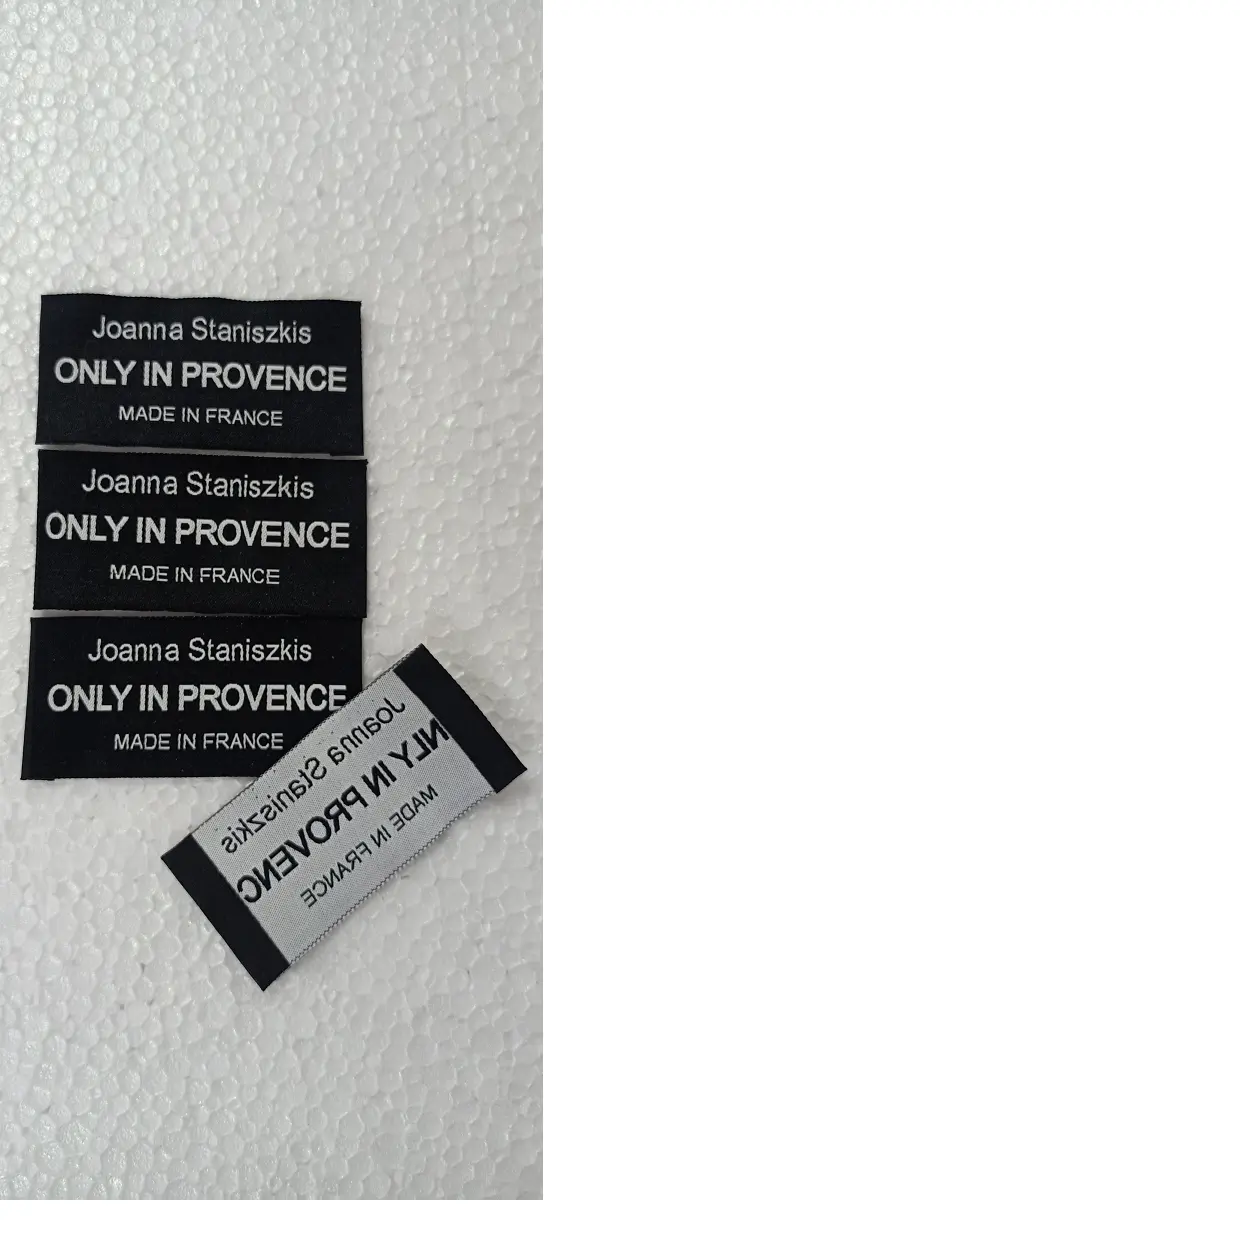 custom made woven labels for clothing designers and home textile designers can be custom made in your designs